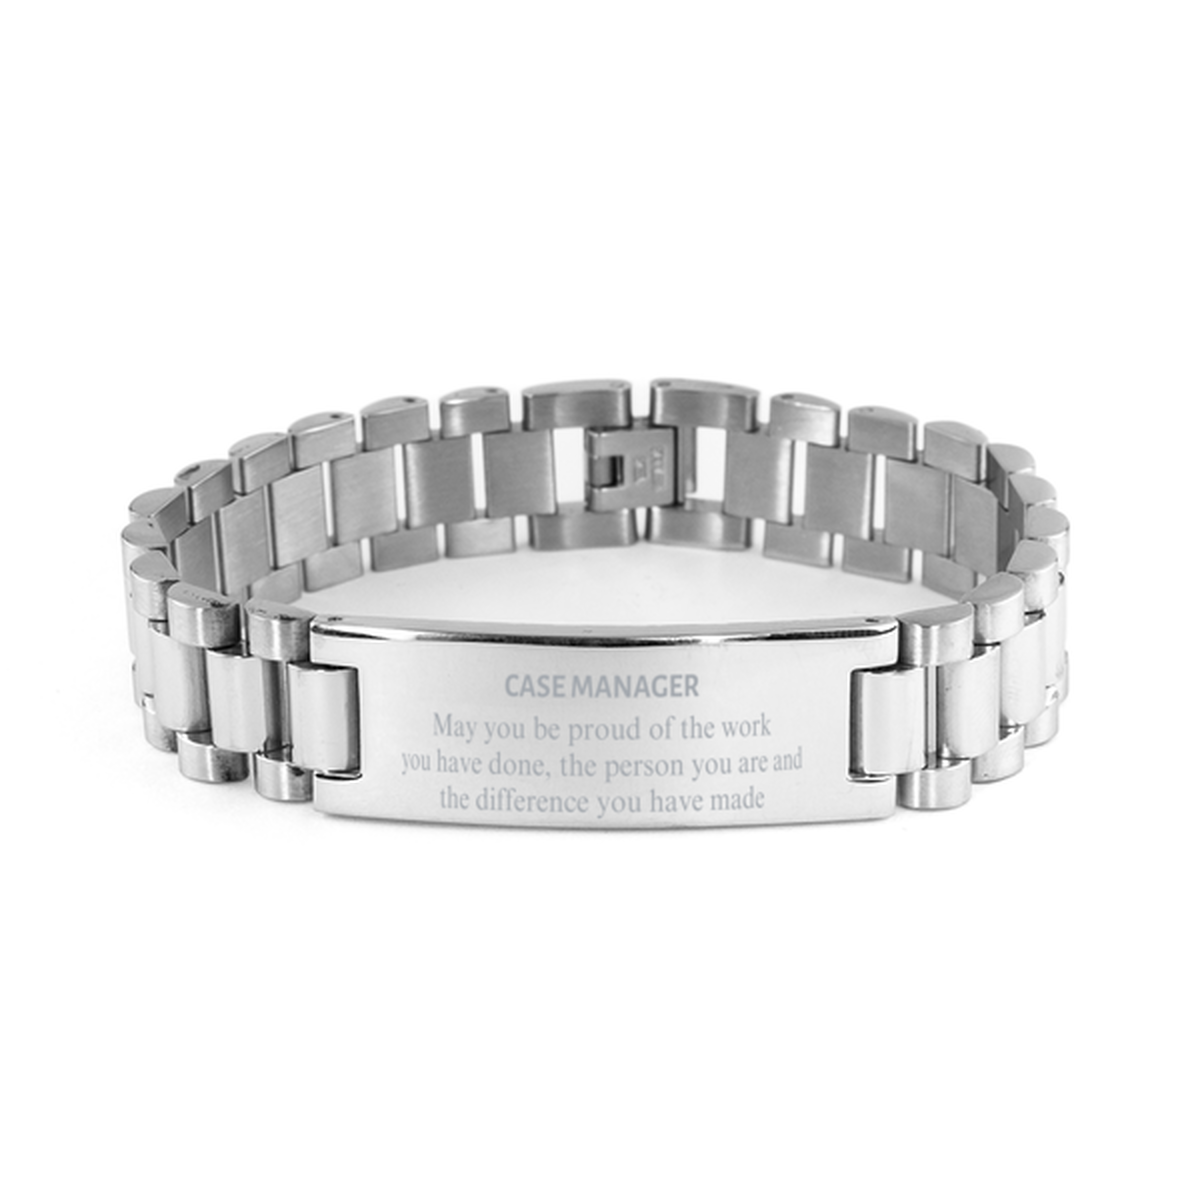 Case Manager May you be proud of the work you have done, Retirement Case Manager Ladder Stainless Steel Bracelet for Colleague Appreciation Gifts Amazing for Case Manager